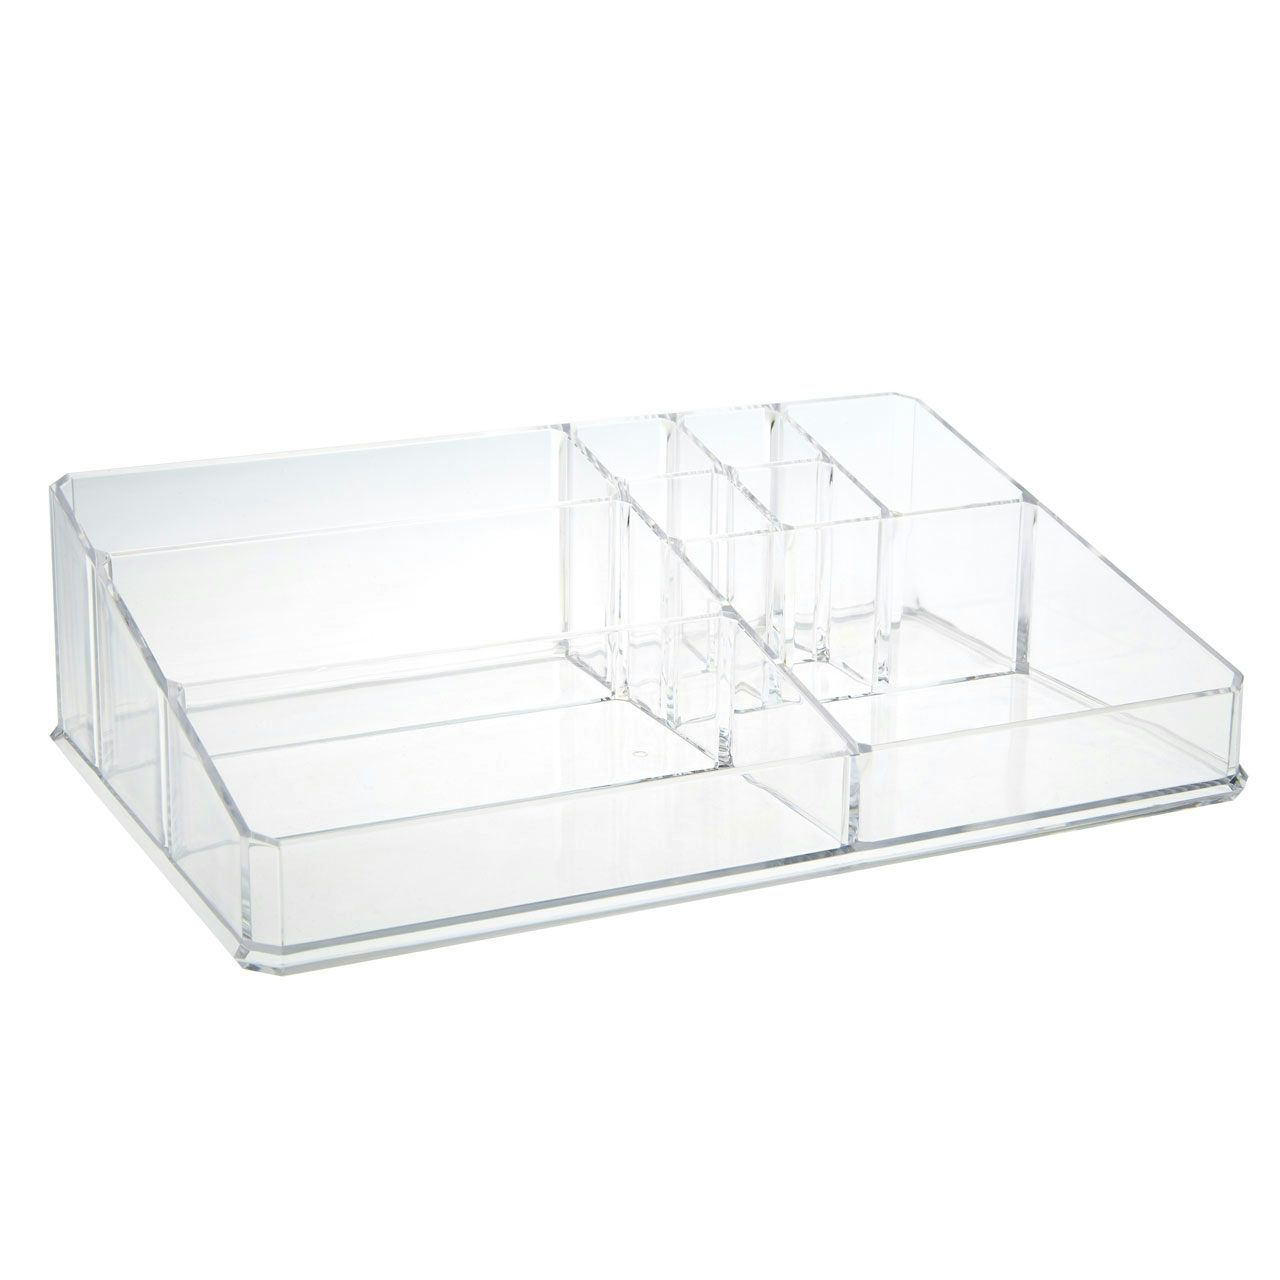 Accents Clear flat cosmetic organiser with 9 compartments